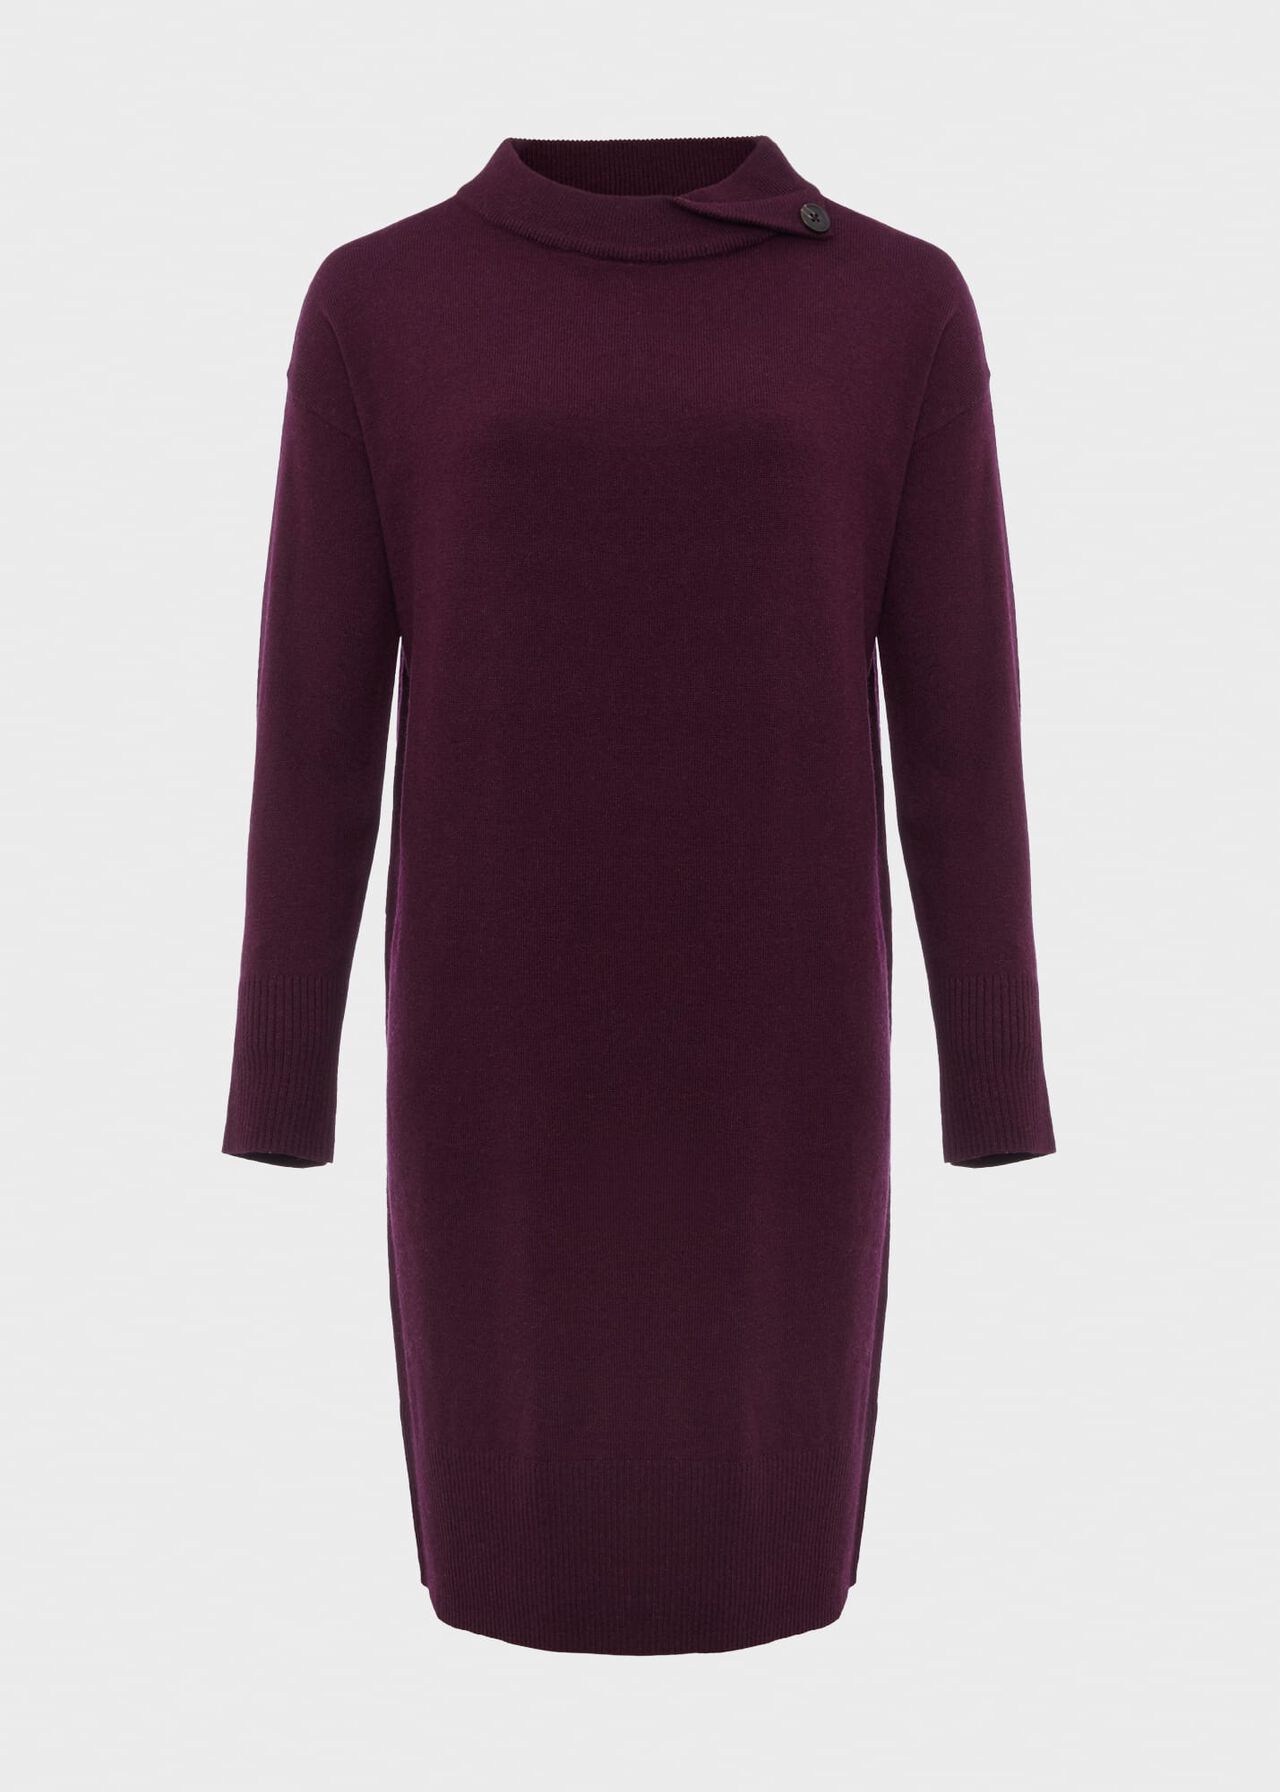 Talia Knitted Dress With Cashmere, Dark Plum, hi-res